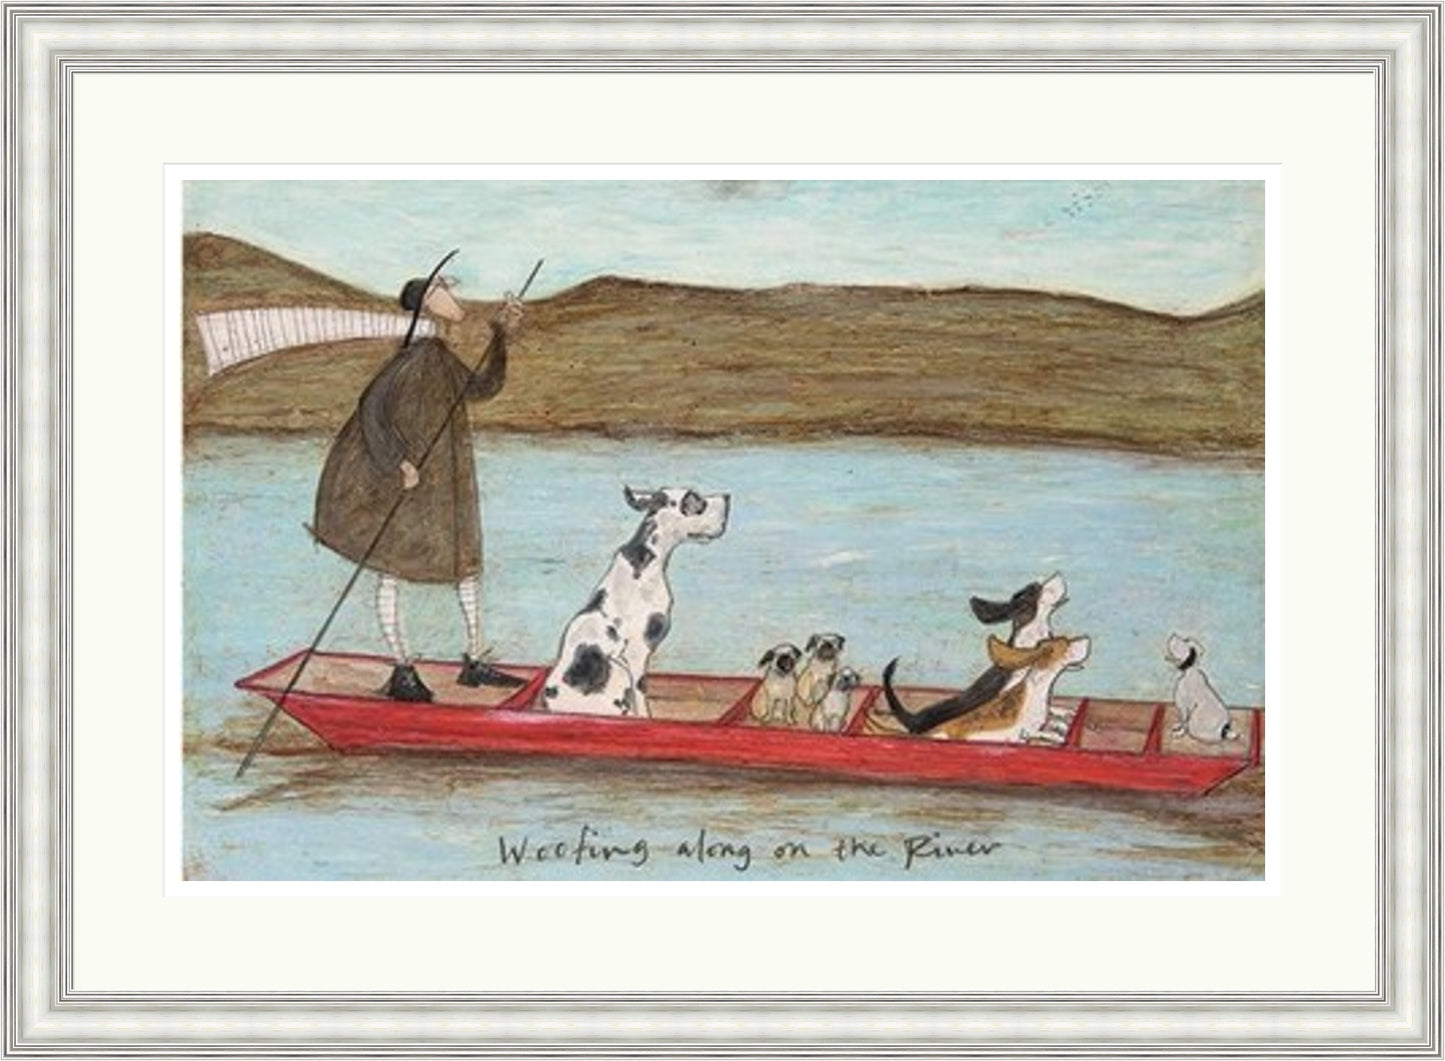 Woofing Along on the River by Sam Toft